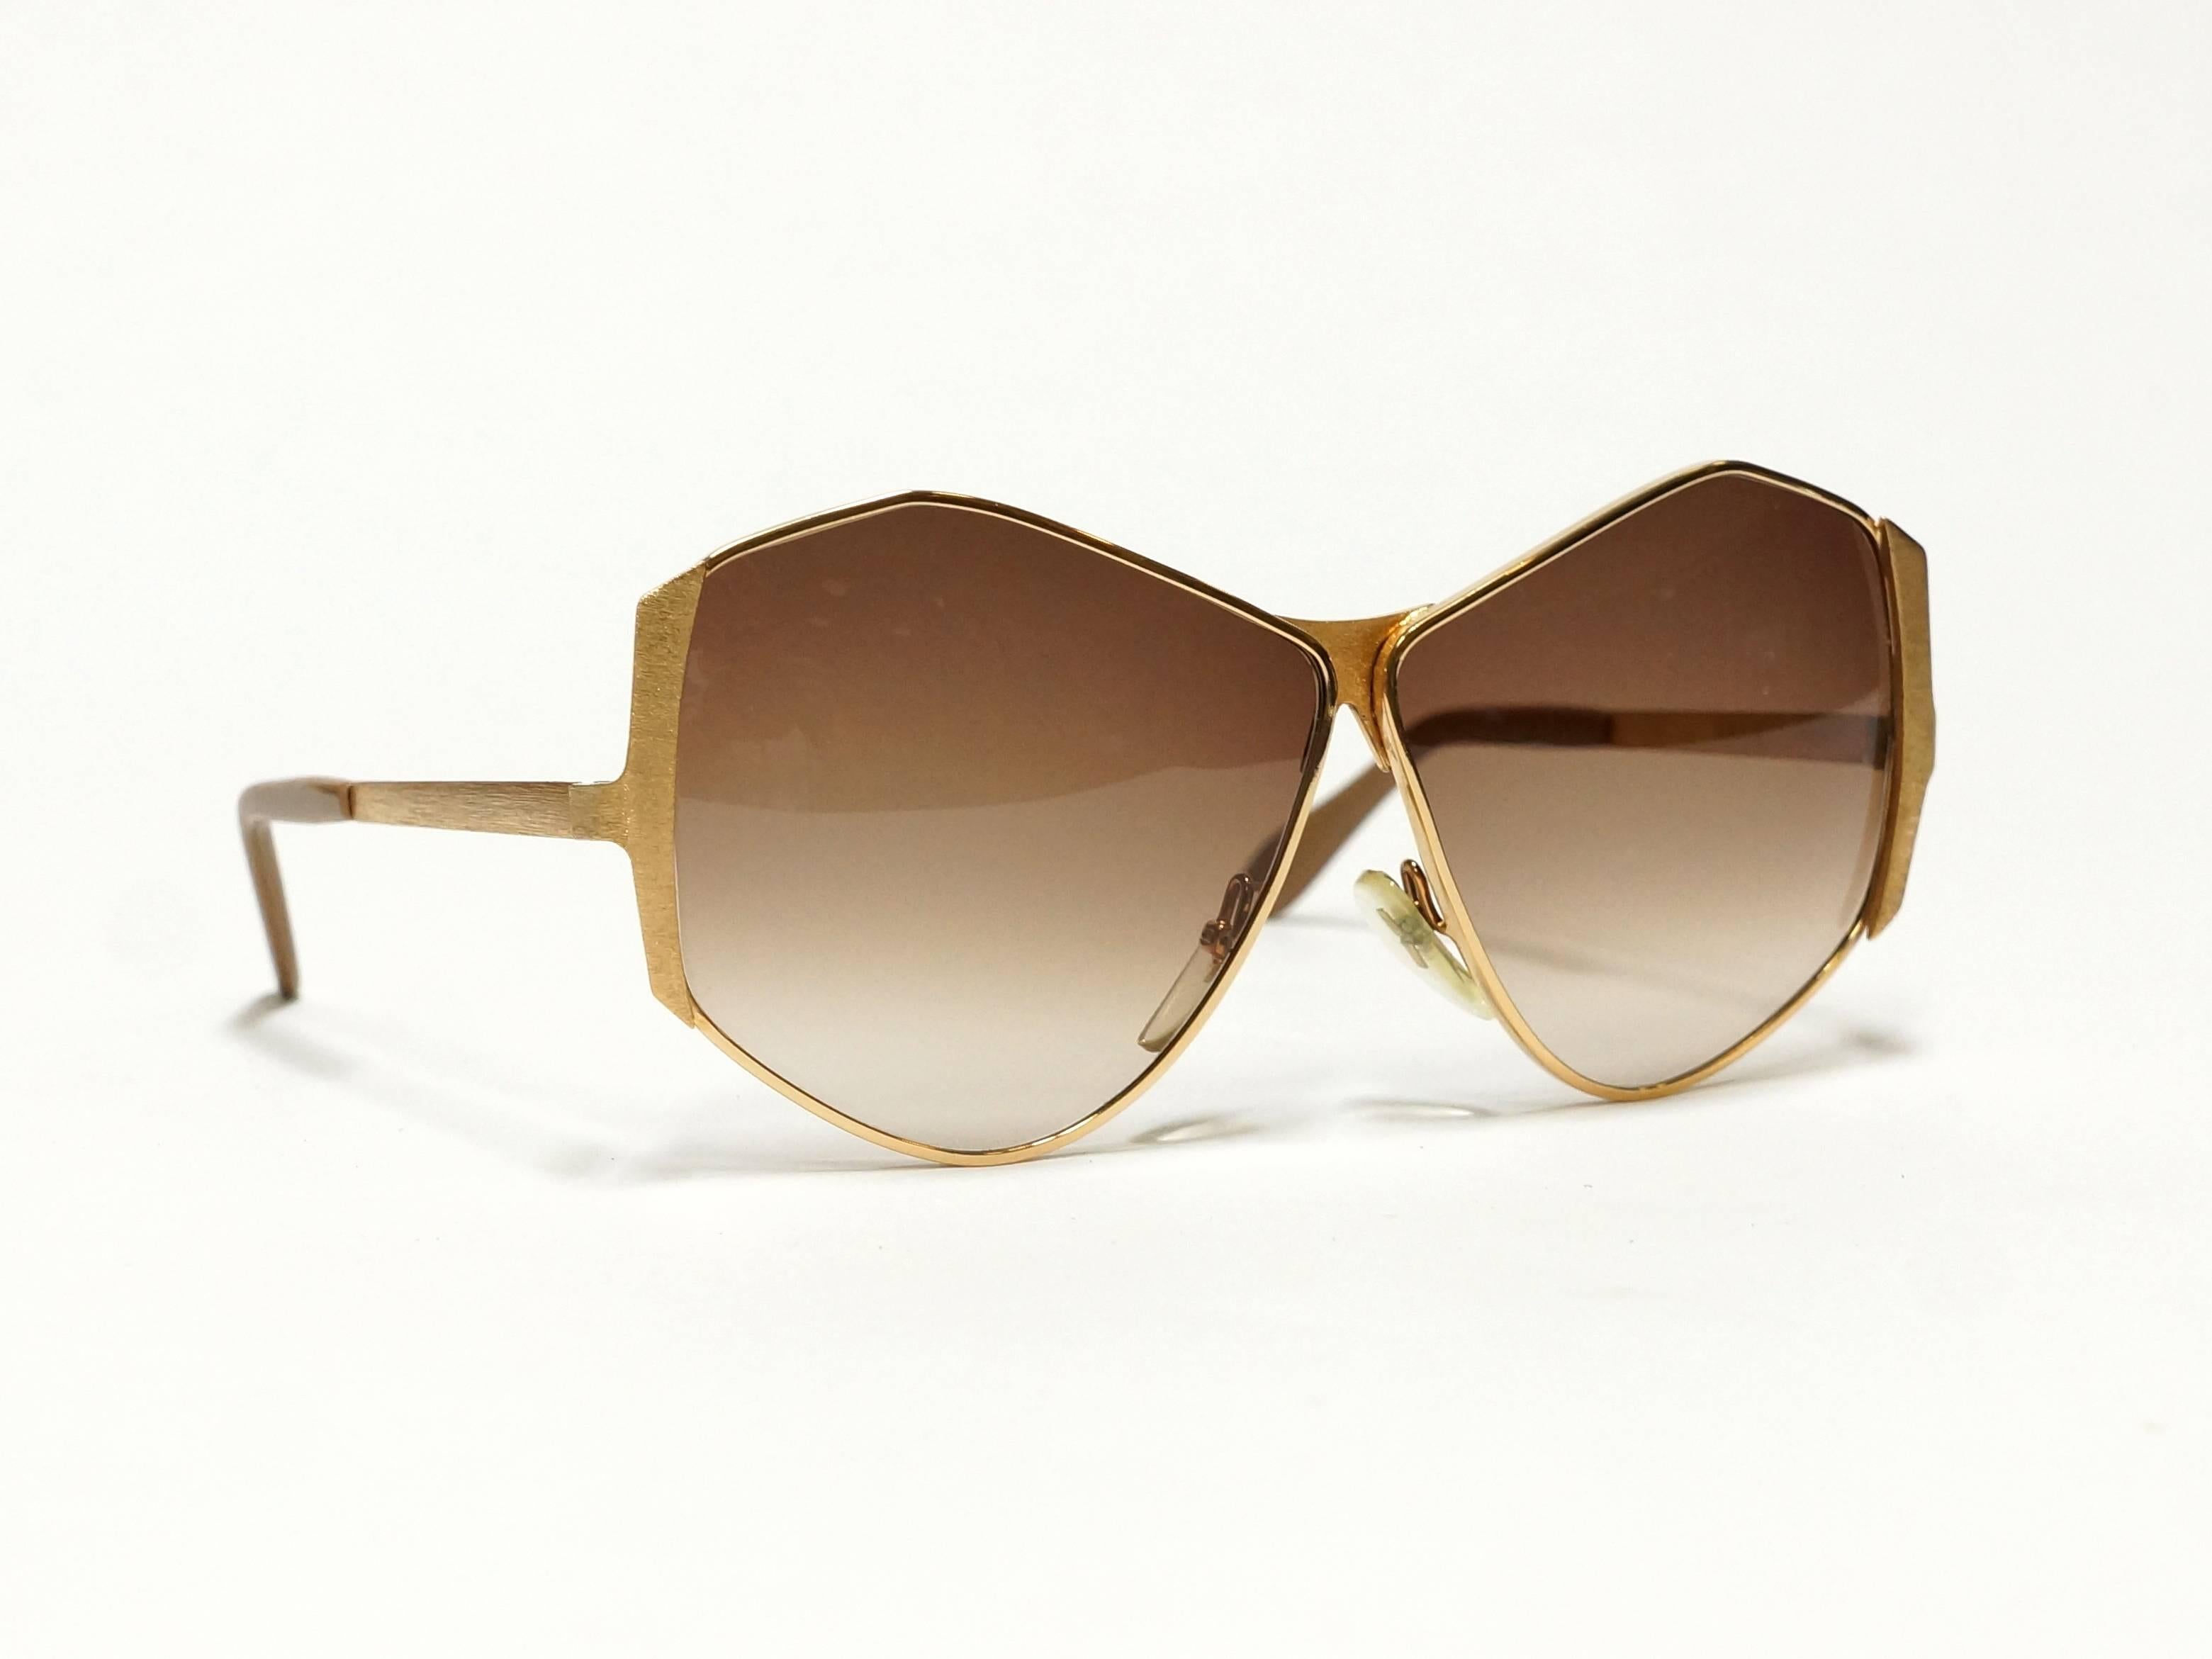 1960s butterfly shape rare and hard to find oversized vintage sunglasses by Neostyle, made in Germany. Gold metal frame with brushed metal highlights  and temples in new old stock condition. 

Model: TINAIR
size: 62▢6 -125

approximate